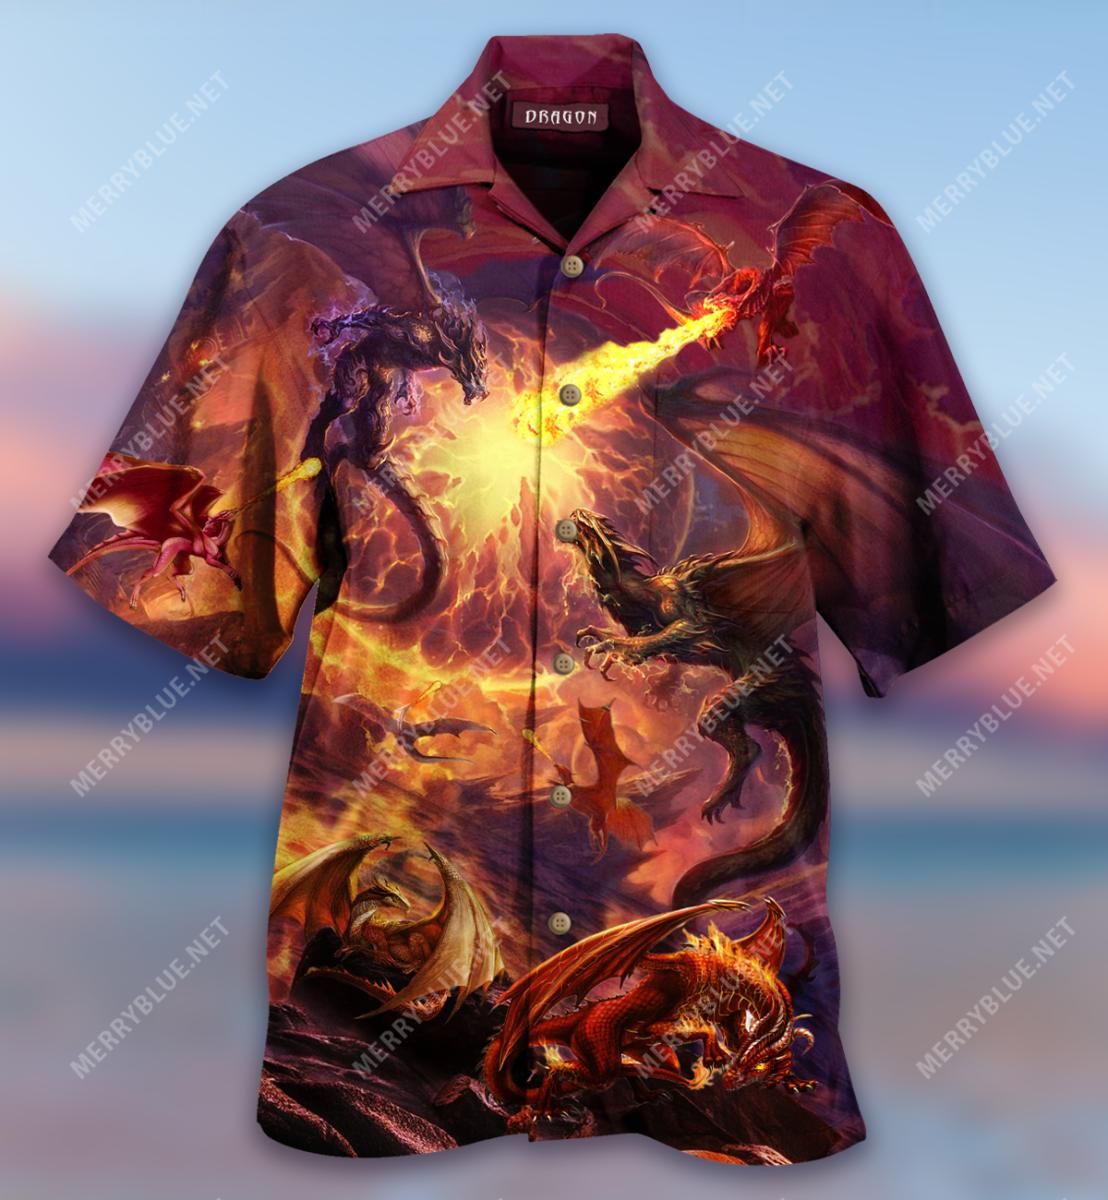 Dragons Try To Open The Door To Time Aloha Hawaiian Shirt Colorful Short Sleeve Summer Beach Casual Shirt For Men And Women